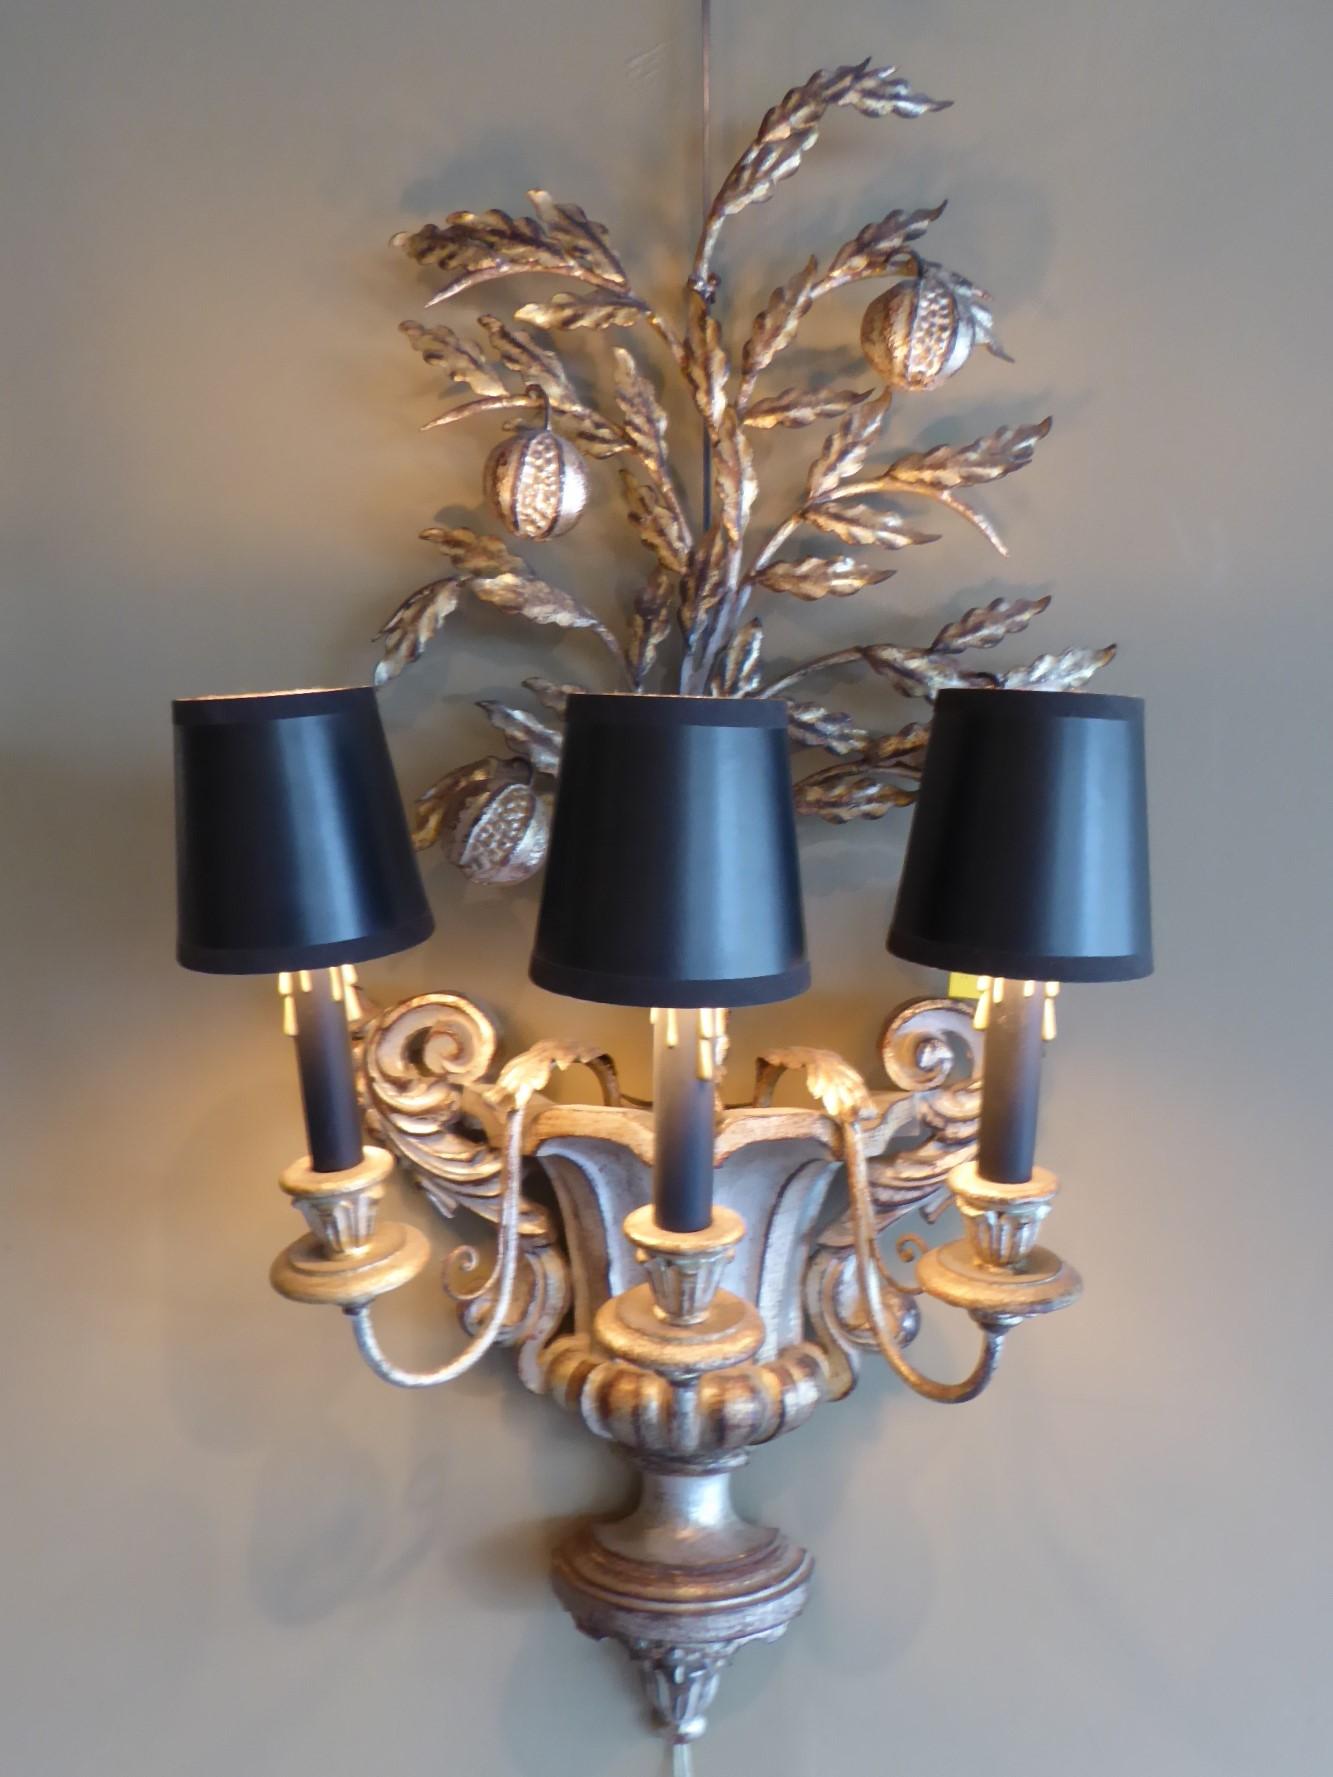 Elegantly representing a large ornate handled urn with a pomegranate topiary growing out of it, this Italian carved & silverleafed applique is just magnificent. A fine metalworked pomegranate topiary tree with fruits rises from the carved urn with